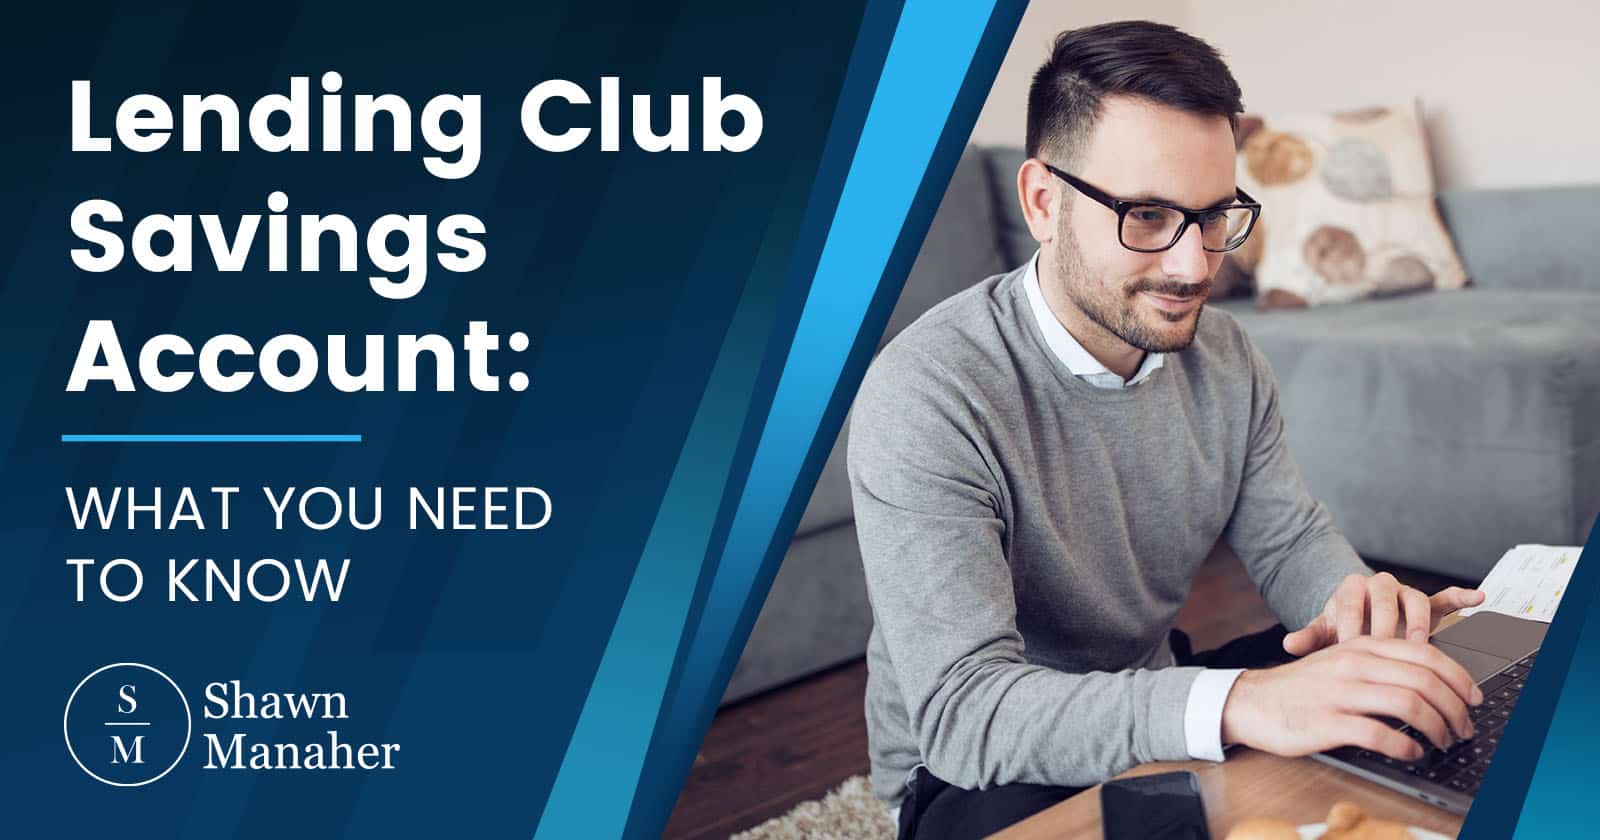 Lending Club Savings Account: [WHAT YOU NEED TO KNOW]